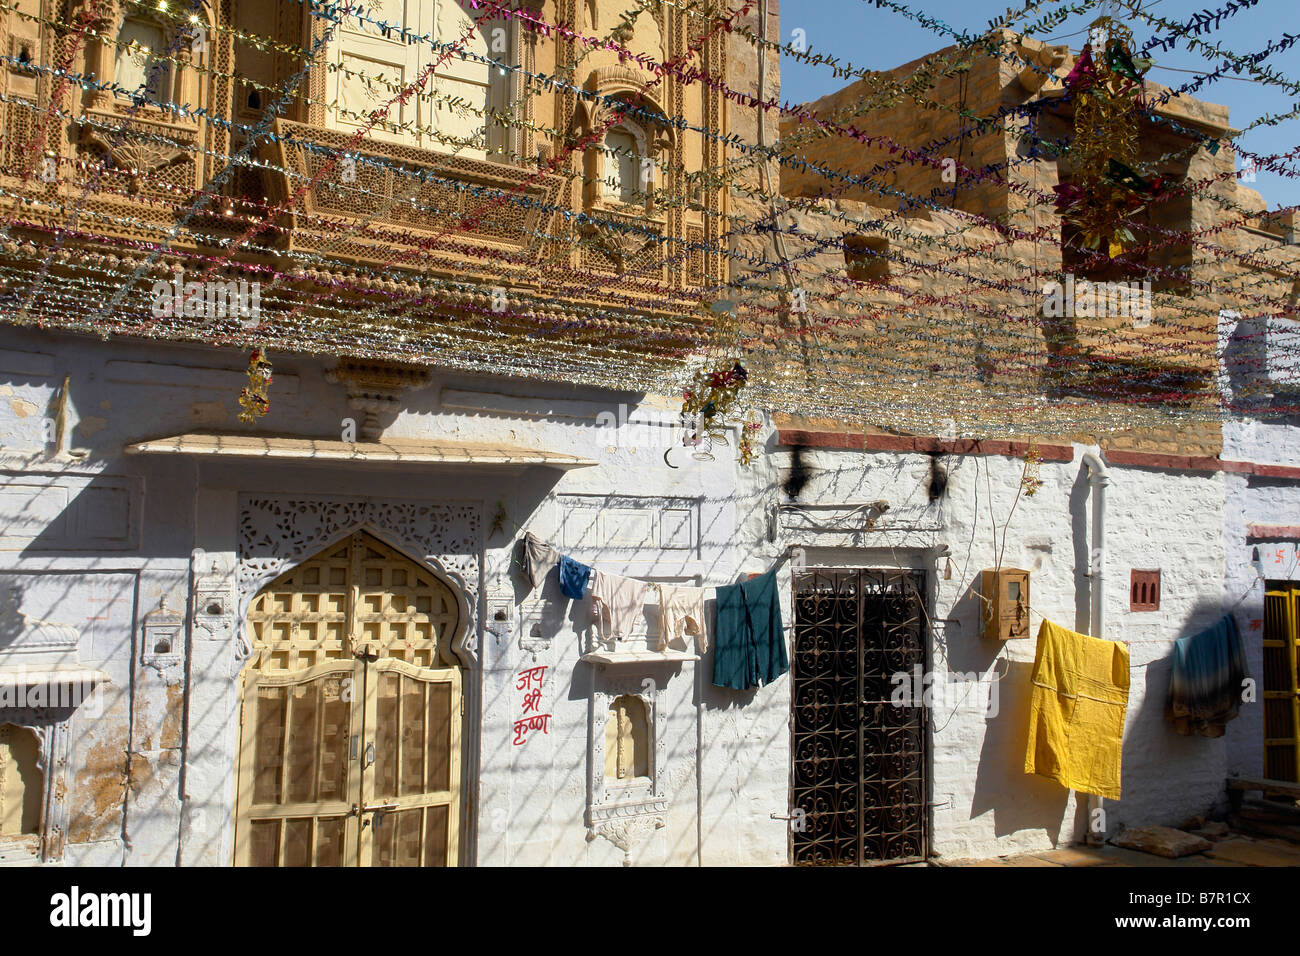 haveli in the backstreets of the old city of jaisalmer with traditional indian street wedding decorations Stock Photo